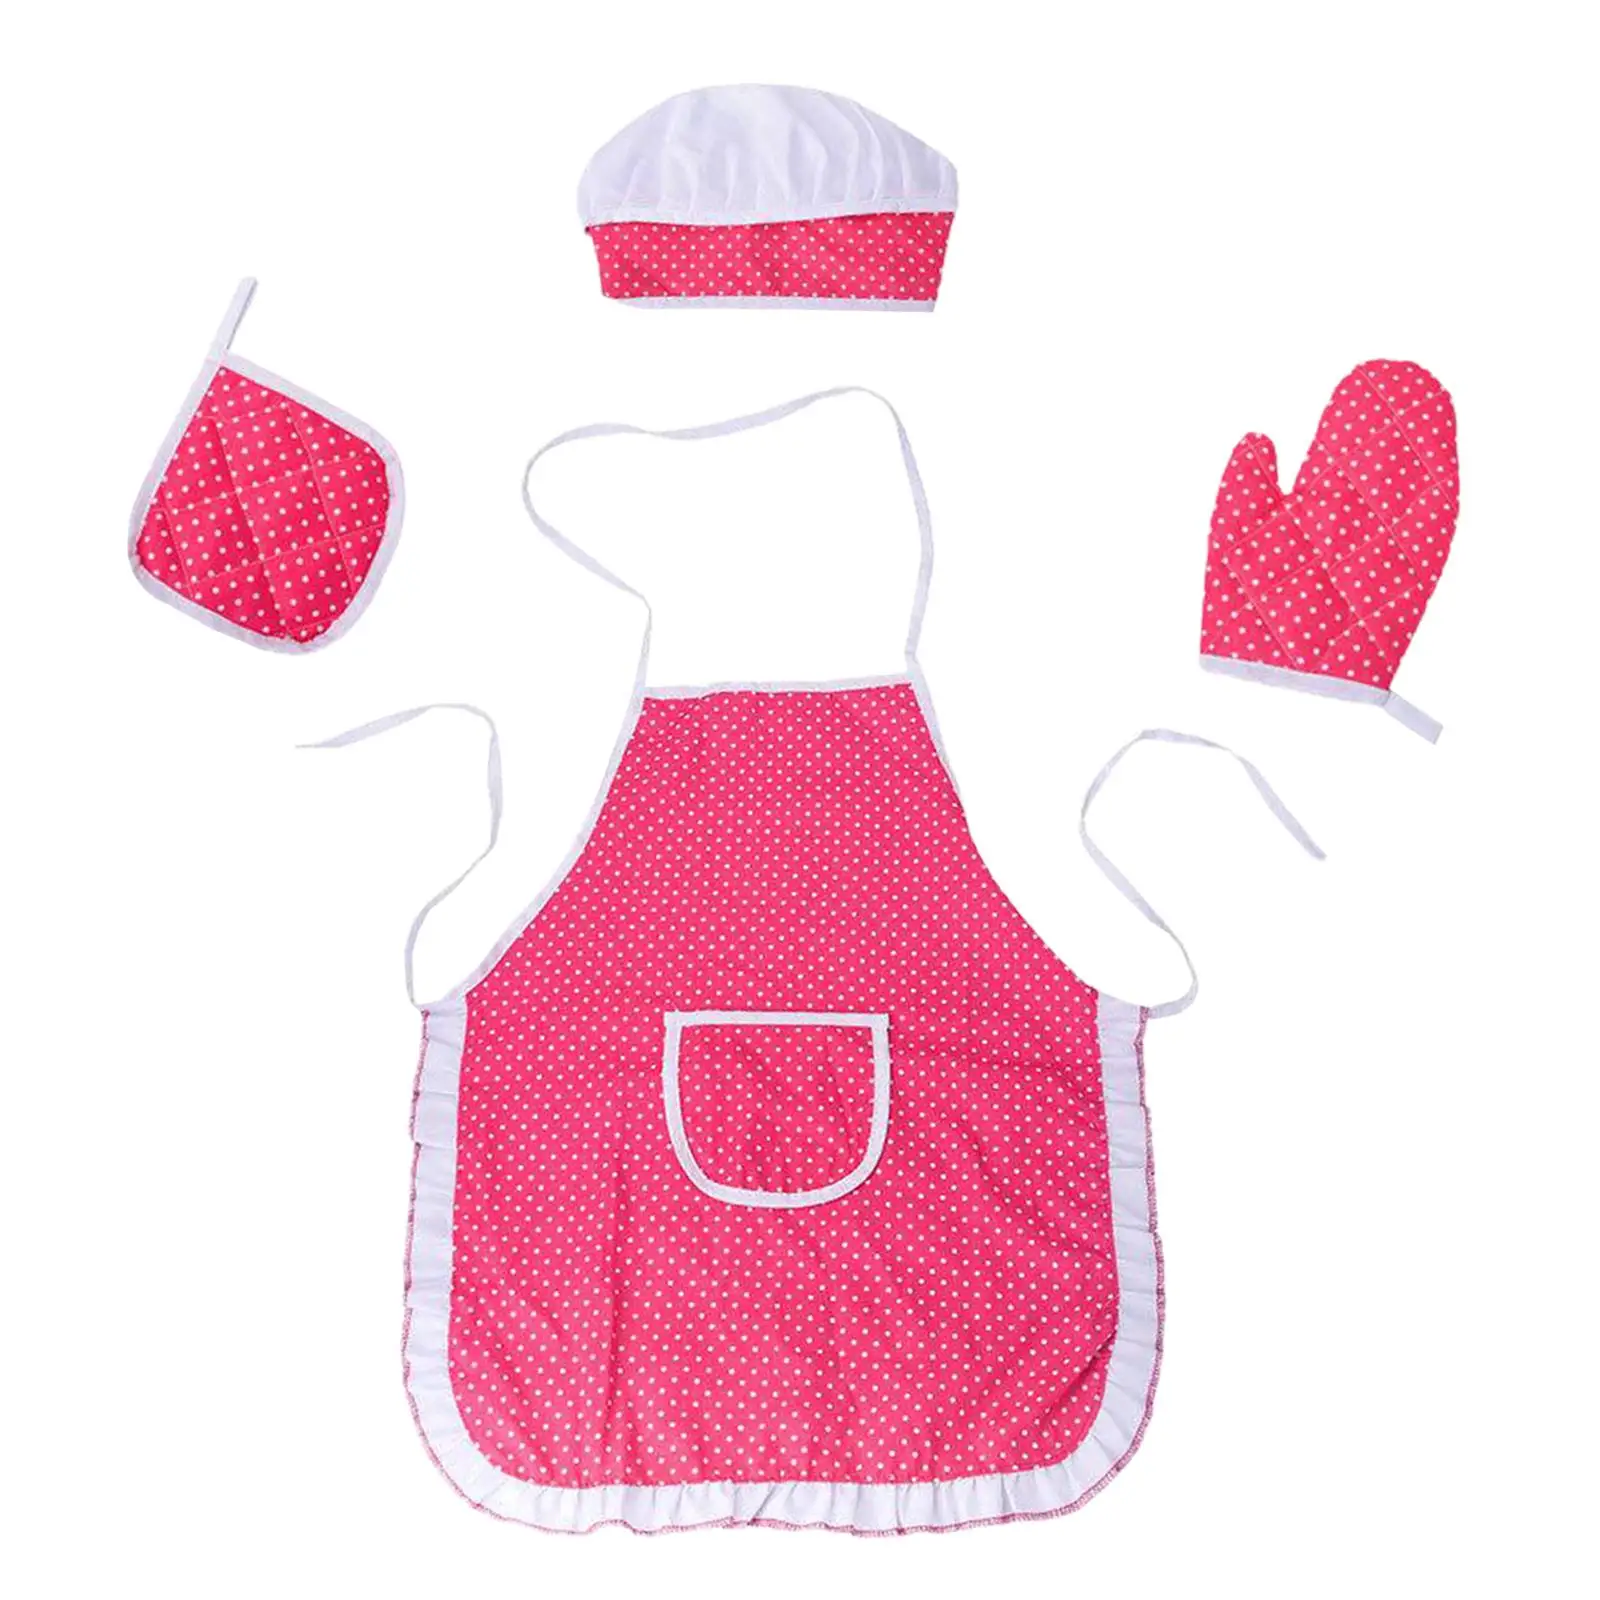 4 Pcs  Role Play Costume Set,  Toddlers Cooking and Baking Set, Apron, Hat, Oven   Pad